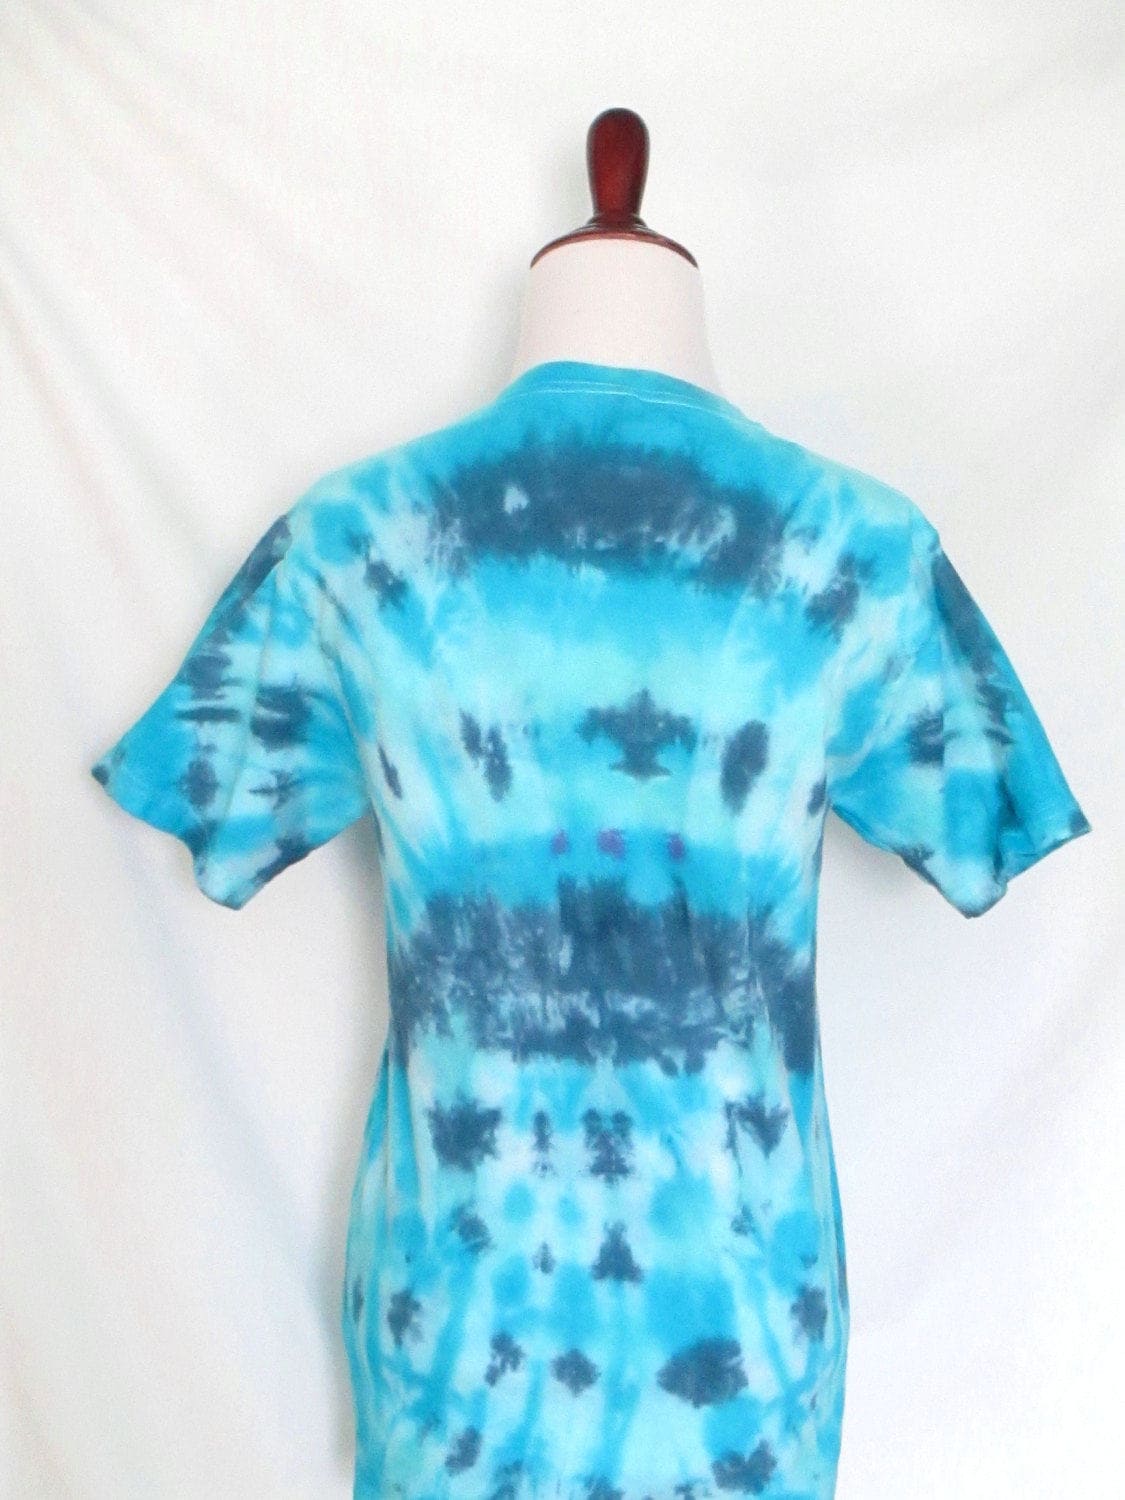 90's Tie Dye T-shirt Vintage Blue Tie Dyed Shirt - Etsy